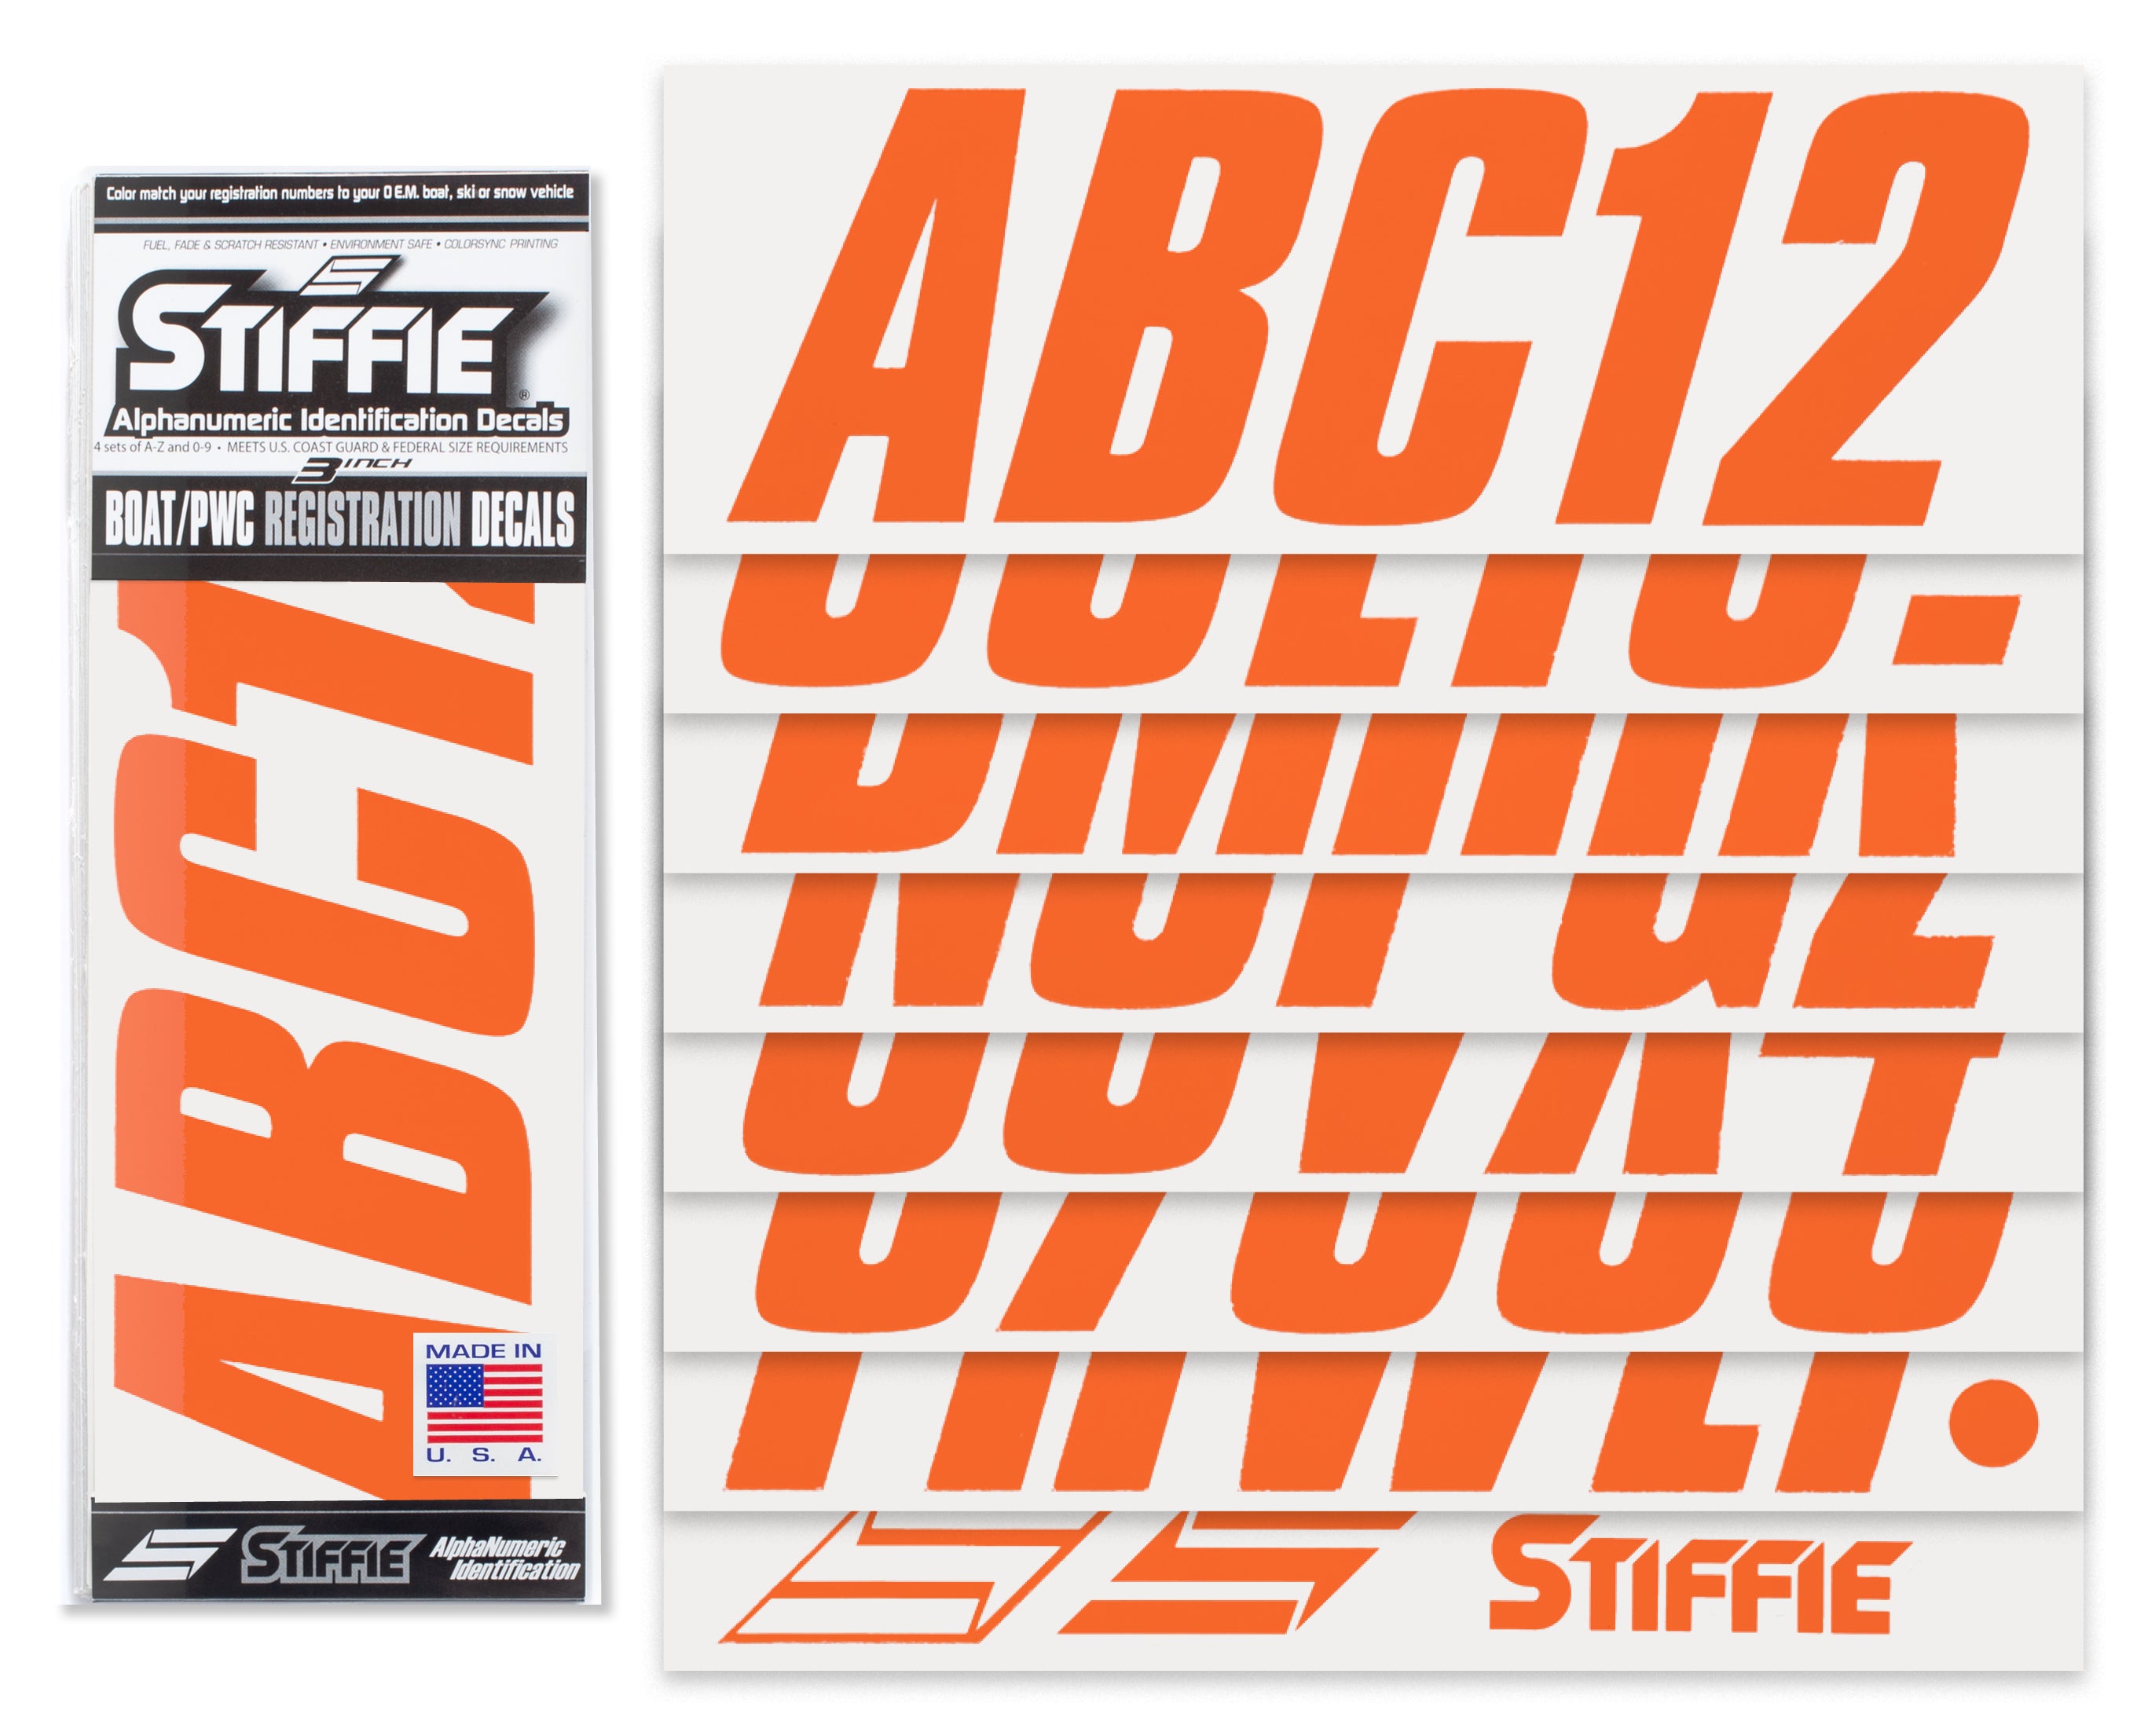 STIFFIE Shift Orange 3" ID Kit Alpha-Numeric Registration Identification Numbers Stickers Decals for Boats & Personal Watercraft